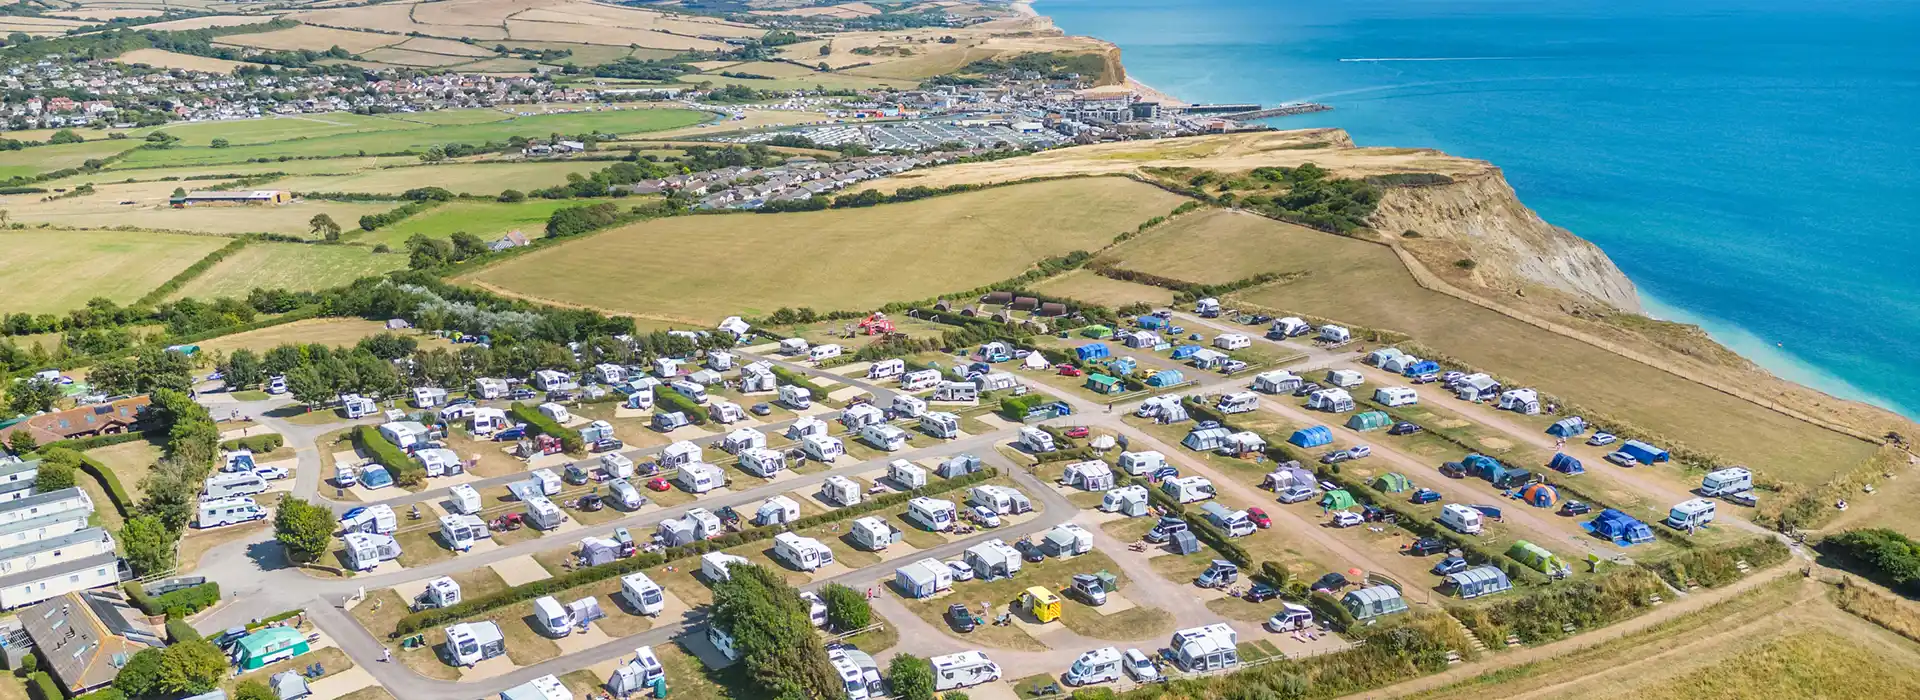 All year round campsites in the South West